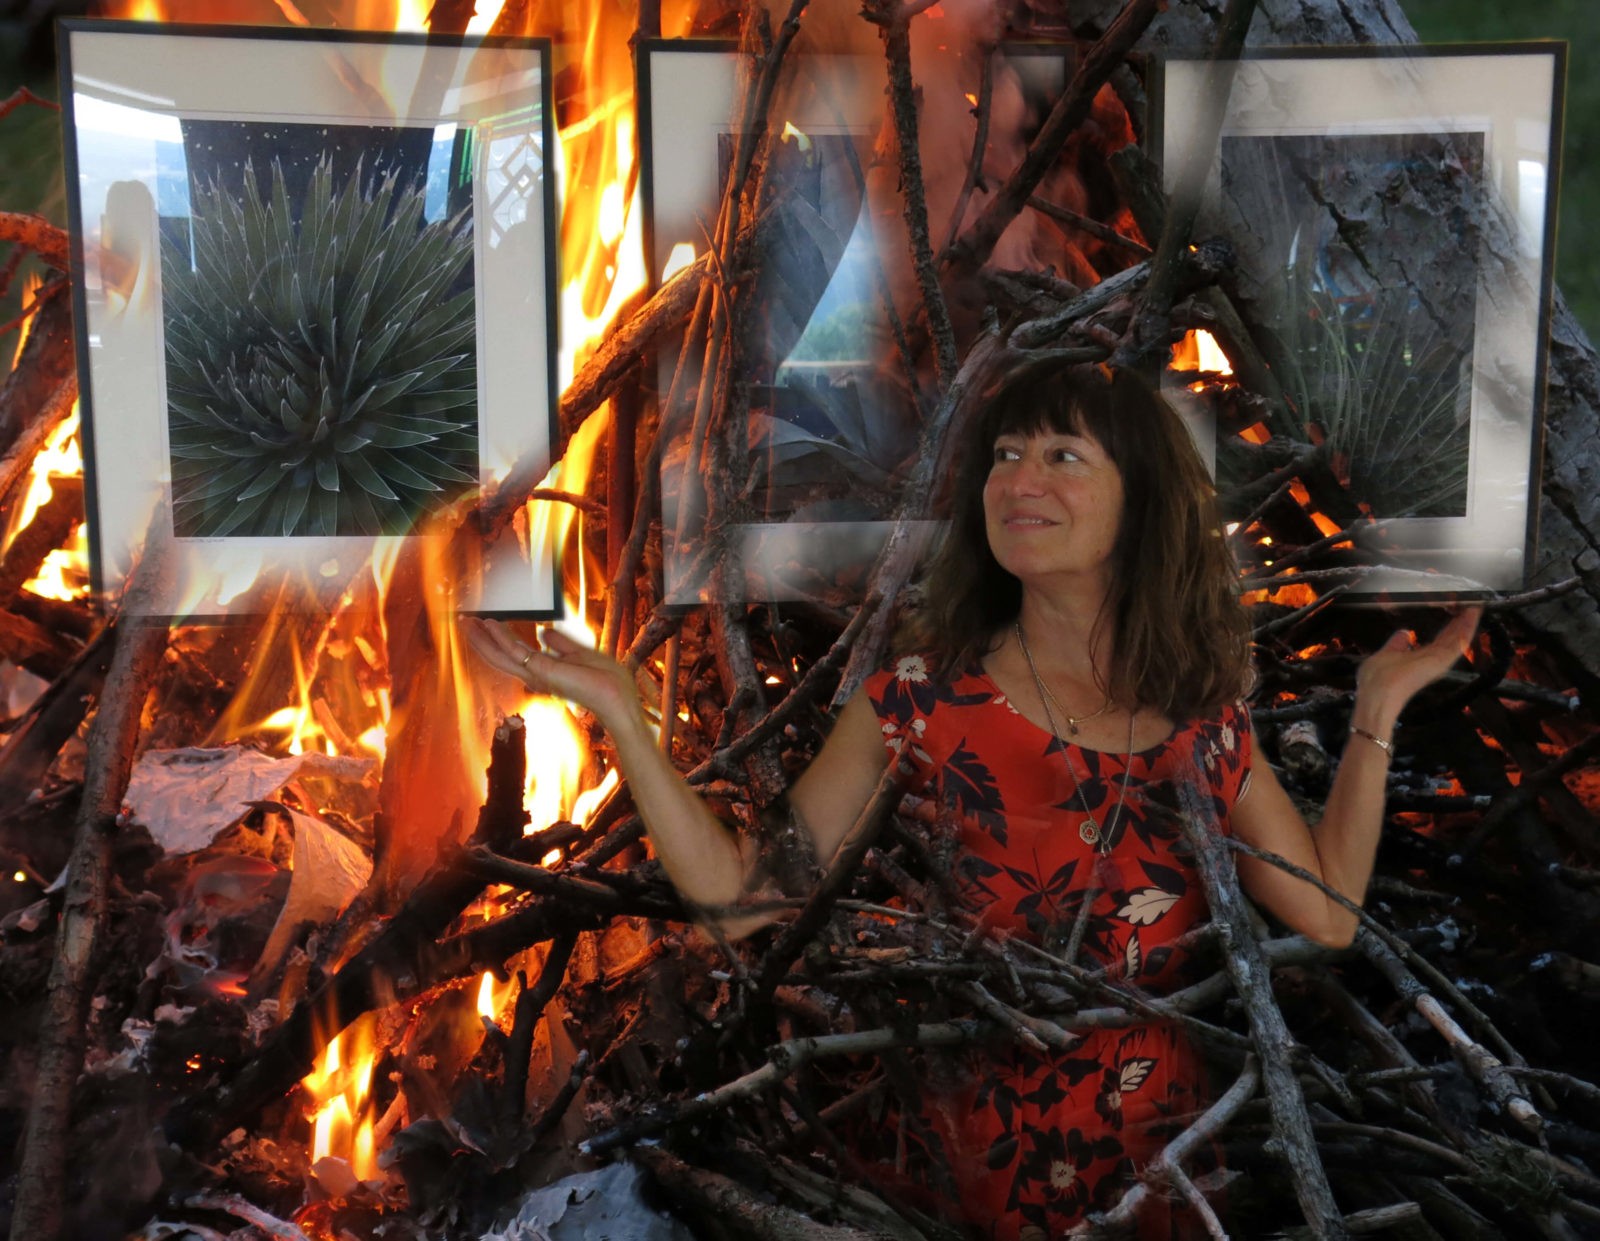 Robin Botie of Ithaca, New York, photoshops her image in campfire flames along with photos from an exhibit of wildlife-up-close by Fingerlakes Photographers